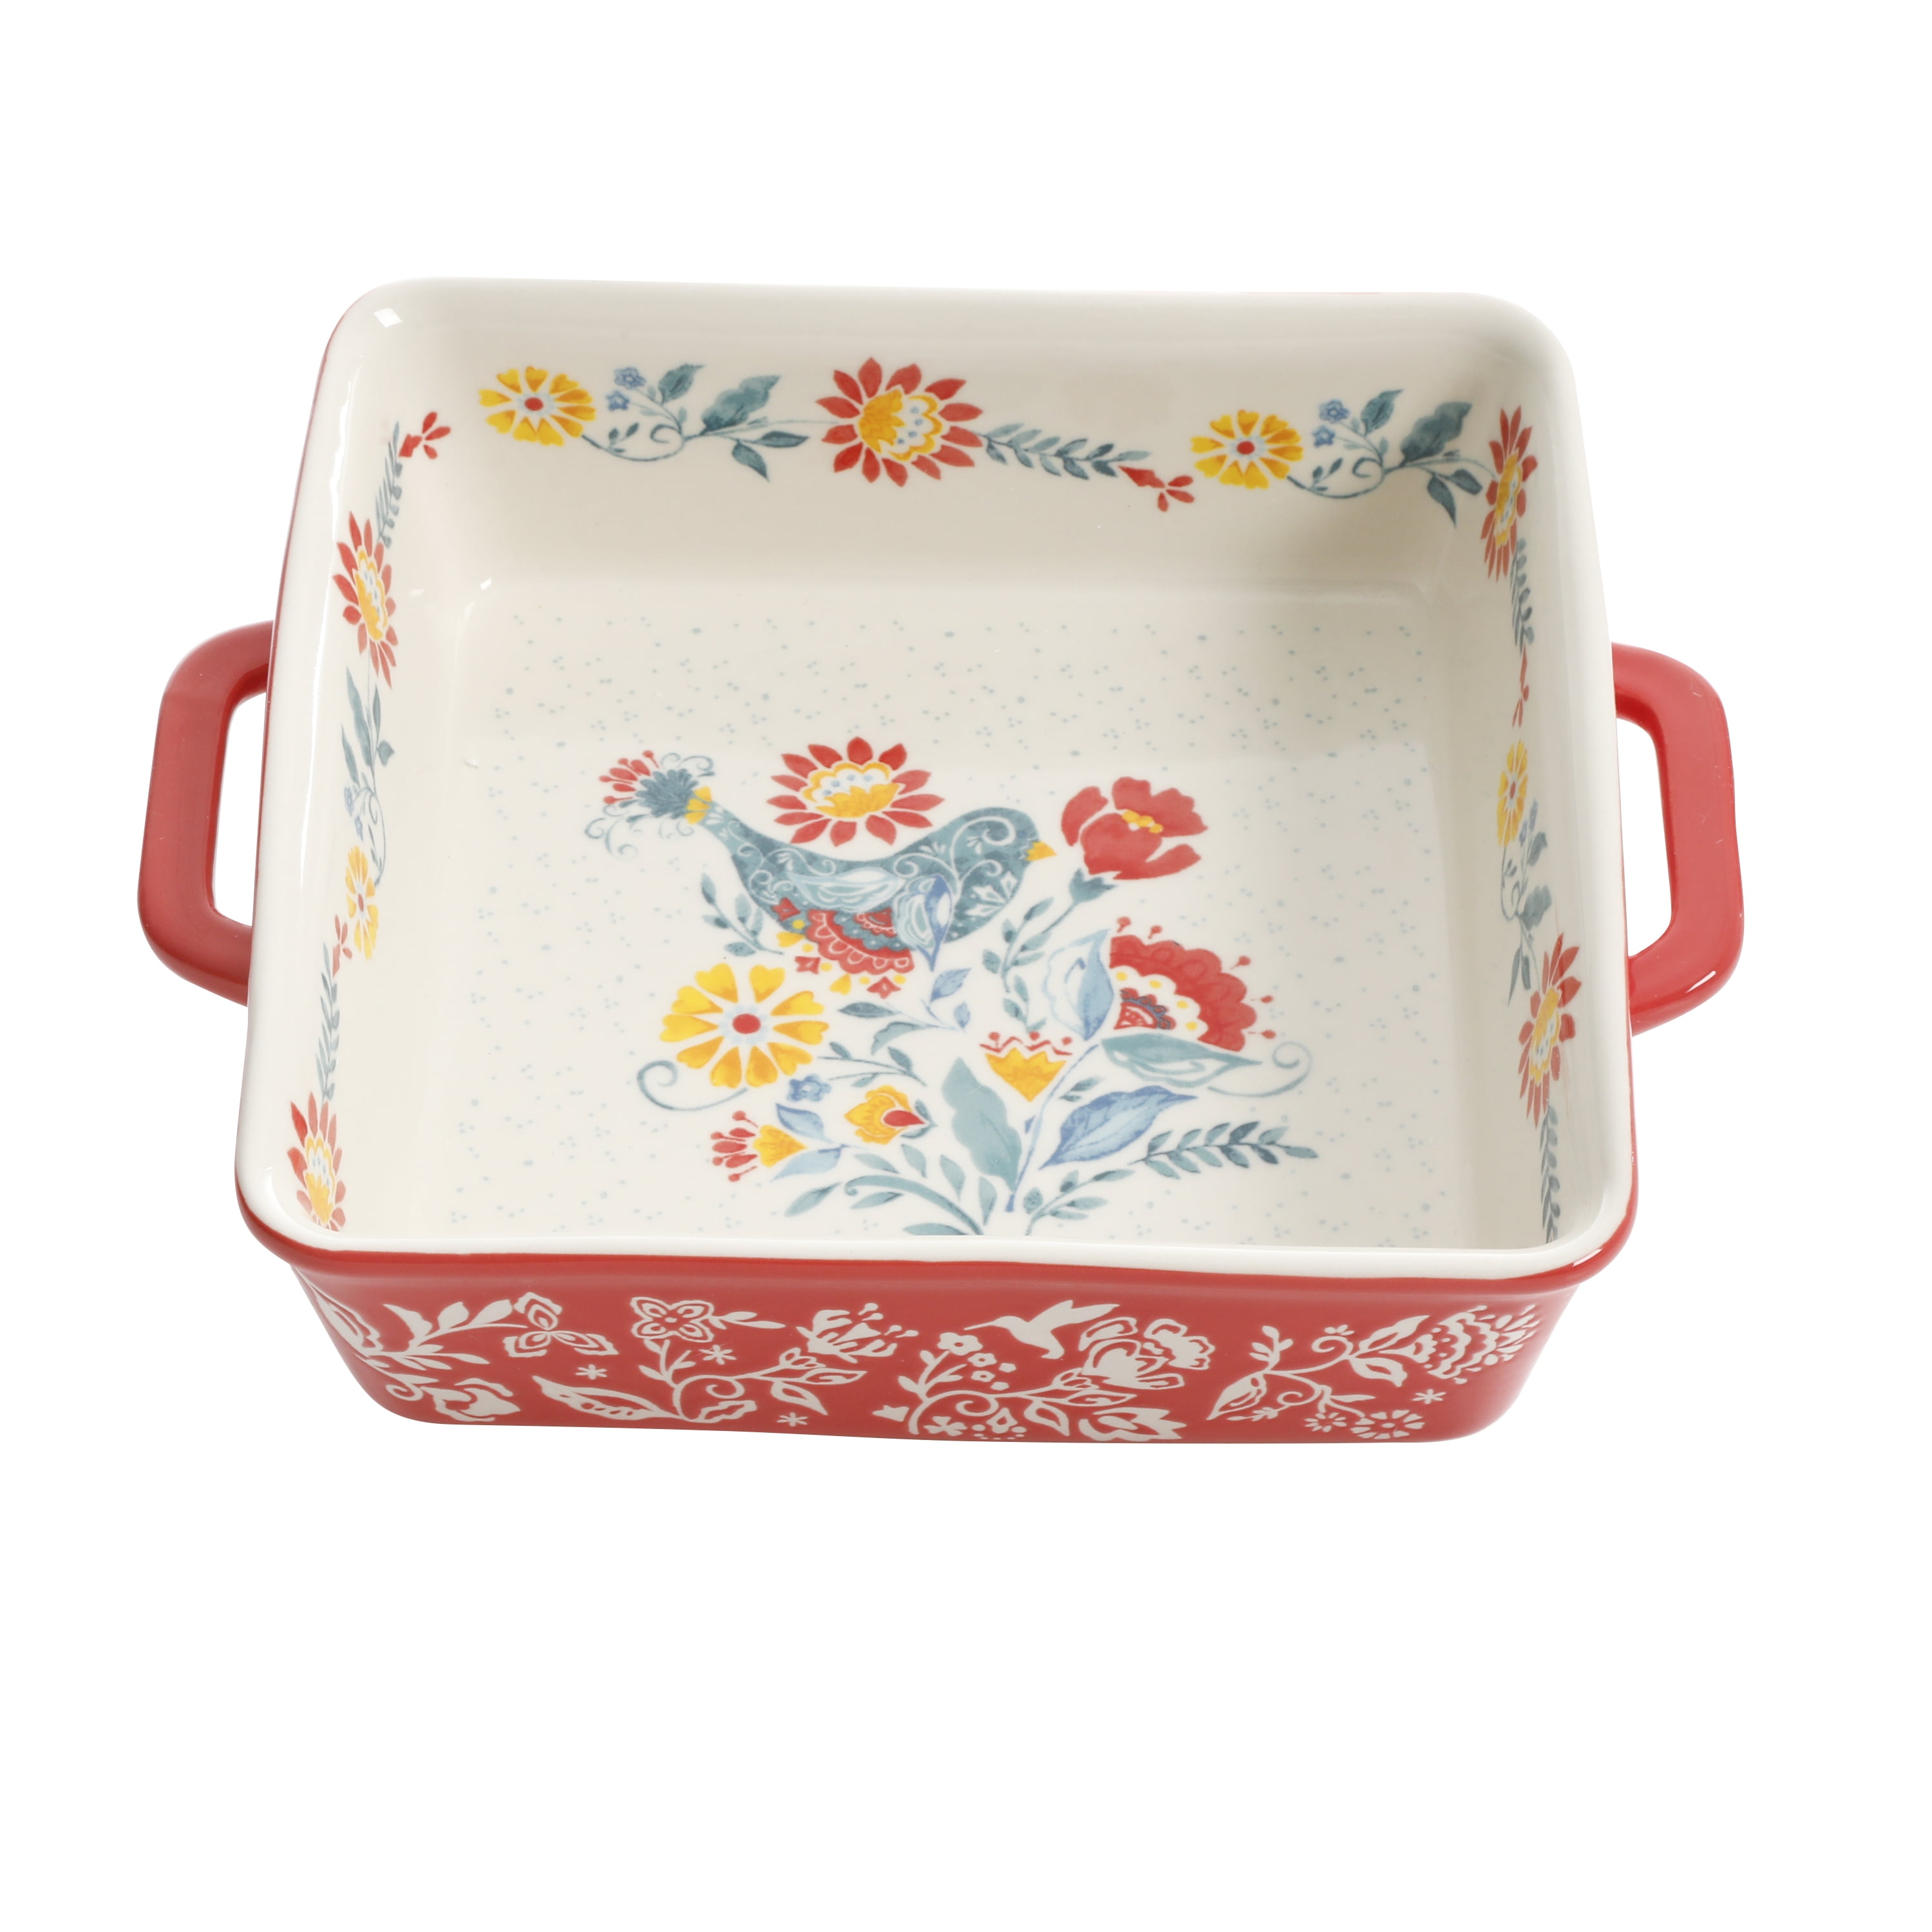 The Pioneer Woman Fiona Floral 2-Piece Rectangular Ceramic Bakers